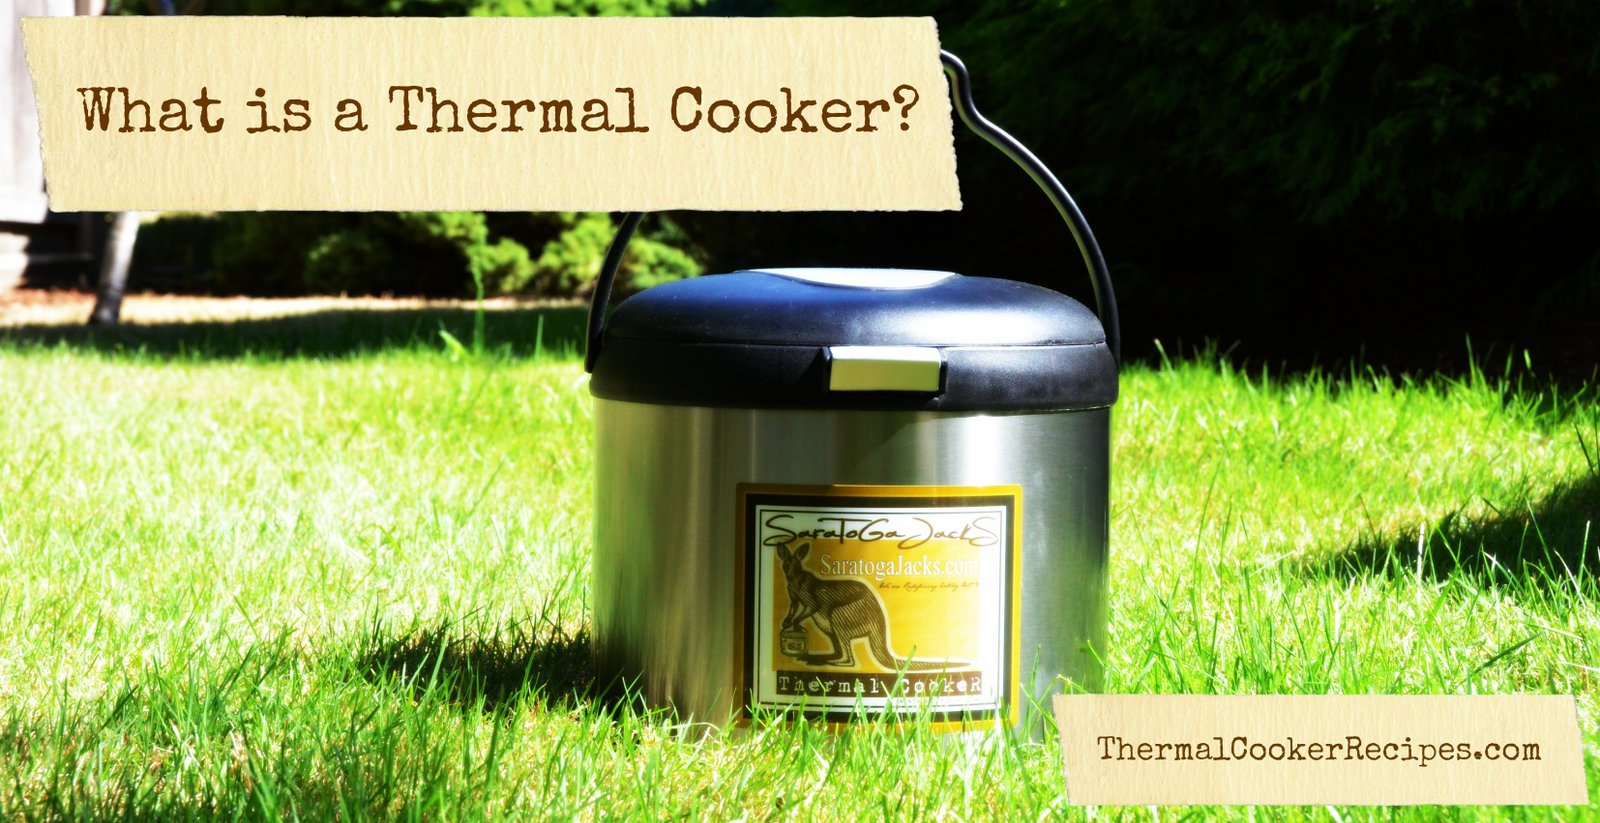 What is a Thermal Cooker?